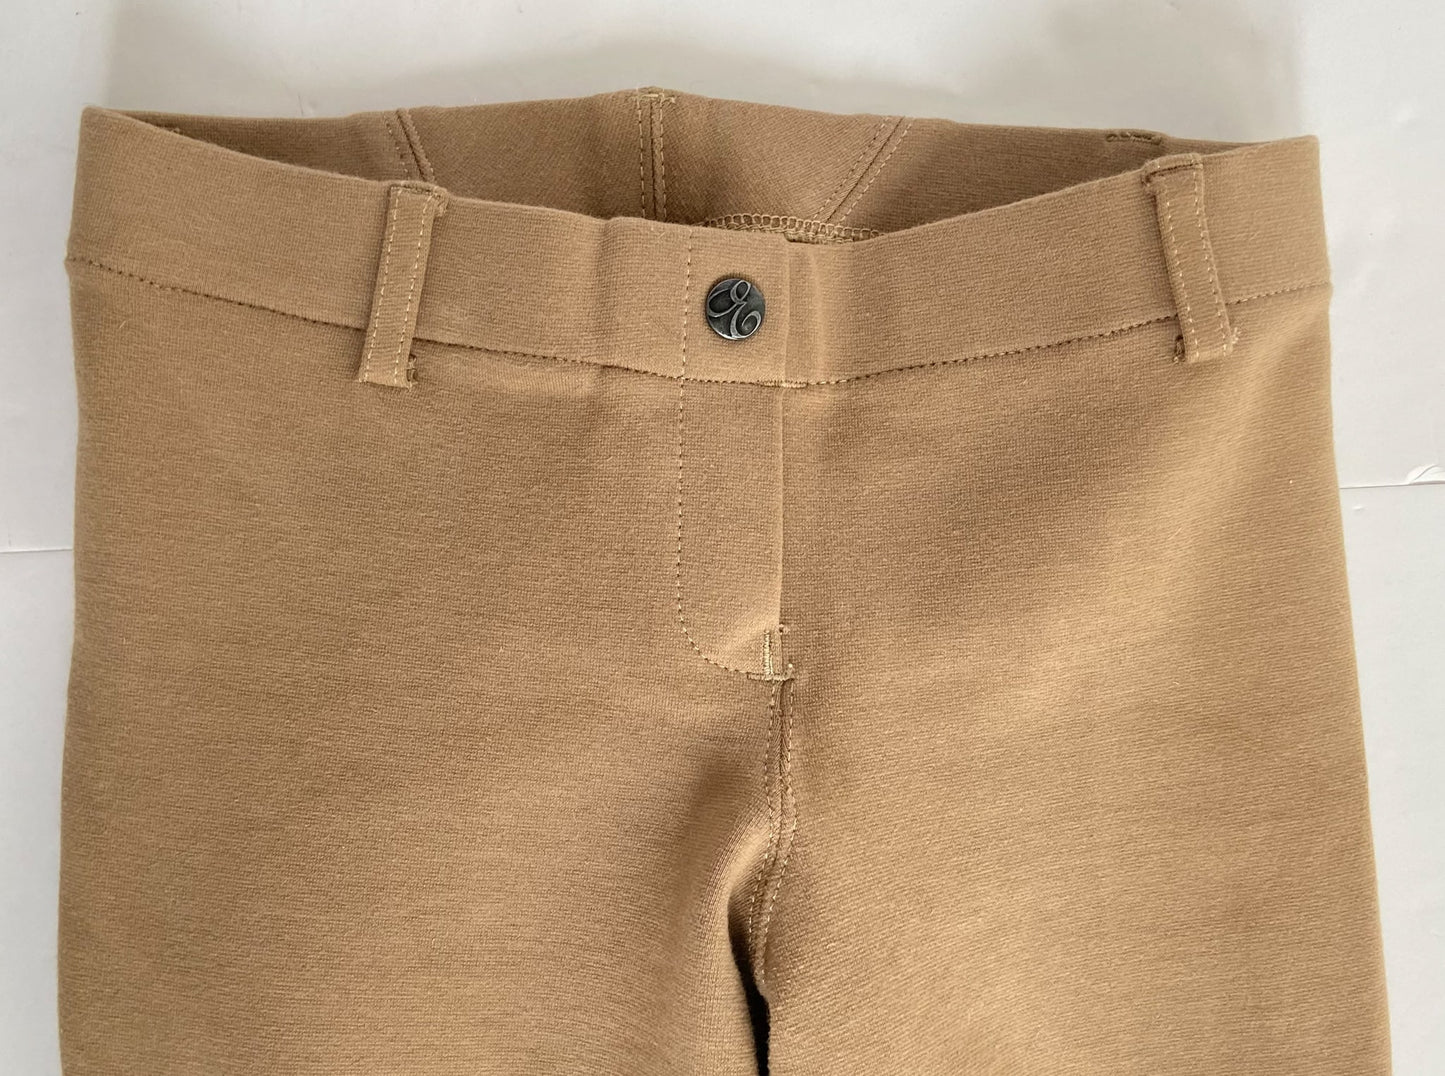 Elation Red Label Pull On Breeches - Tan - Women's 26